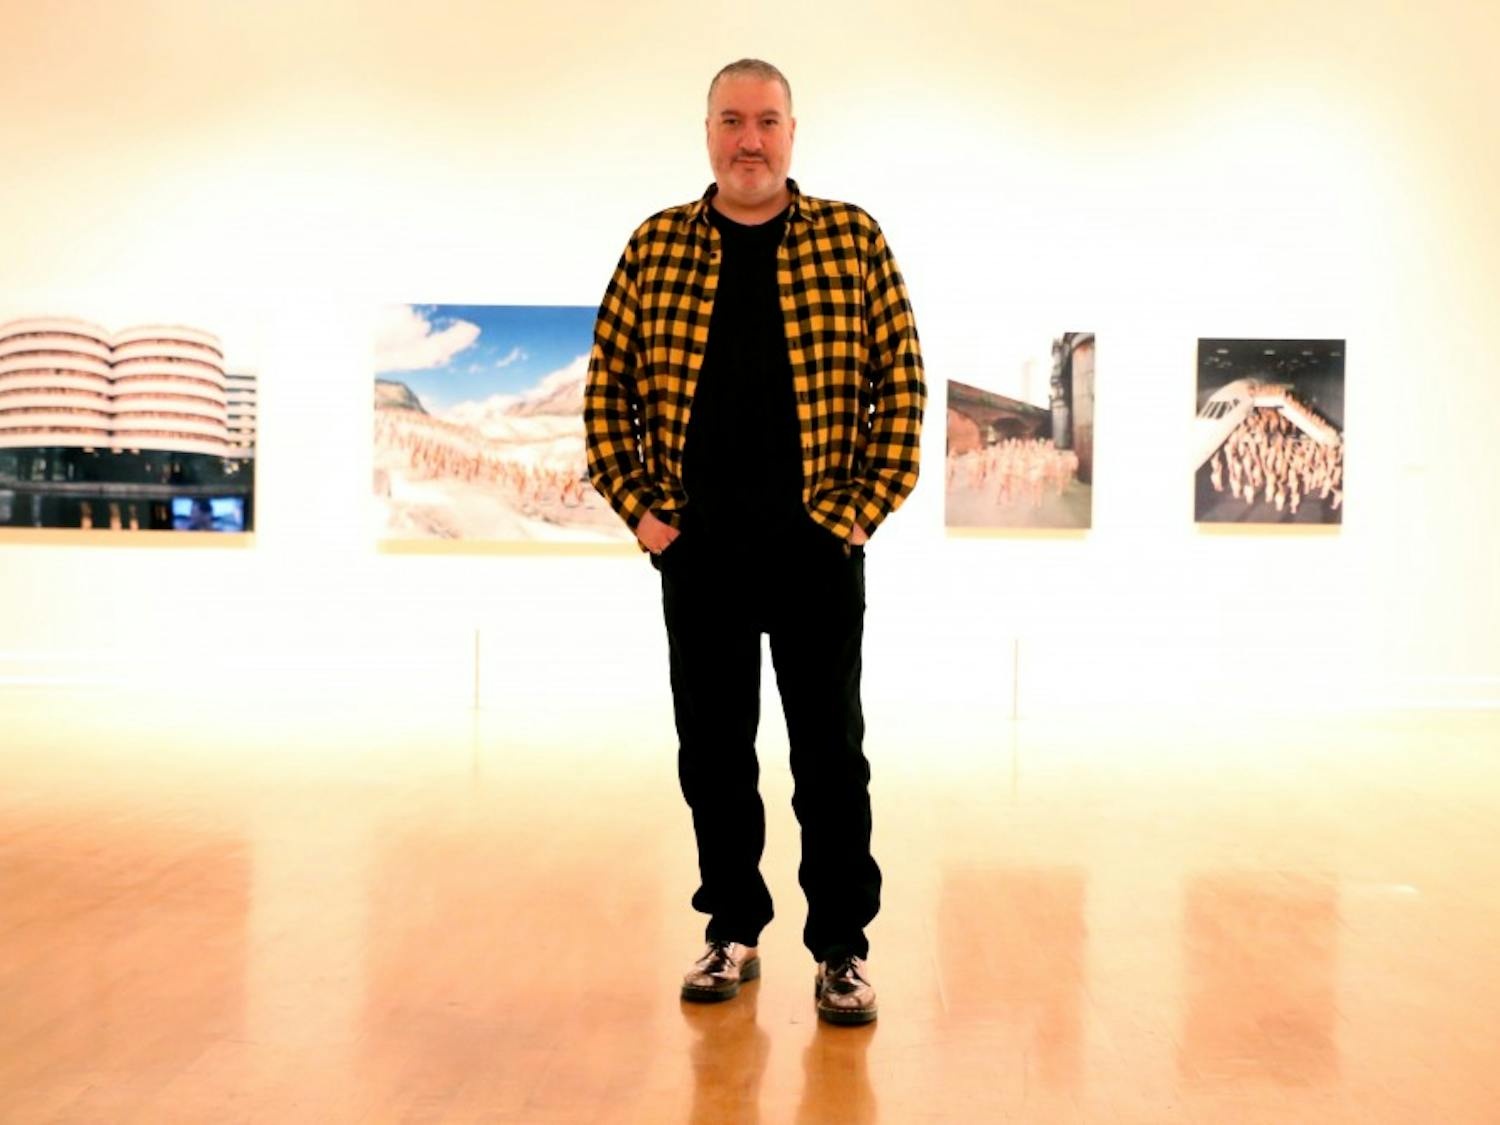 Photographer Spencer Tunick is pictured in the exhibit of his work “Participant” on Wednesday, January 13, 2016, at the ASU Art Museum in Tempe.